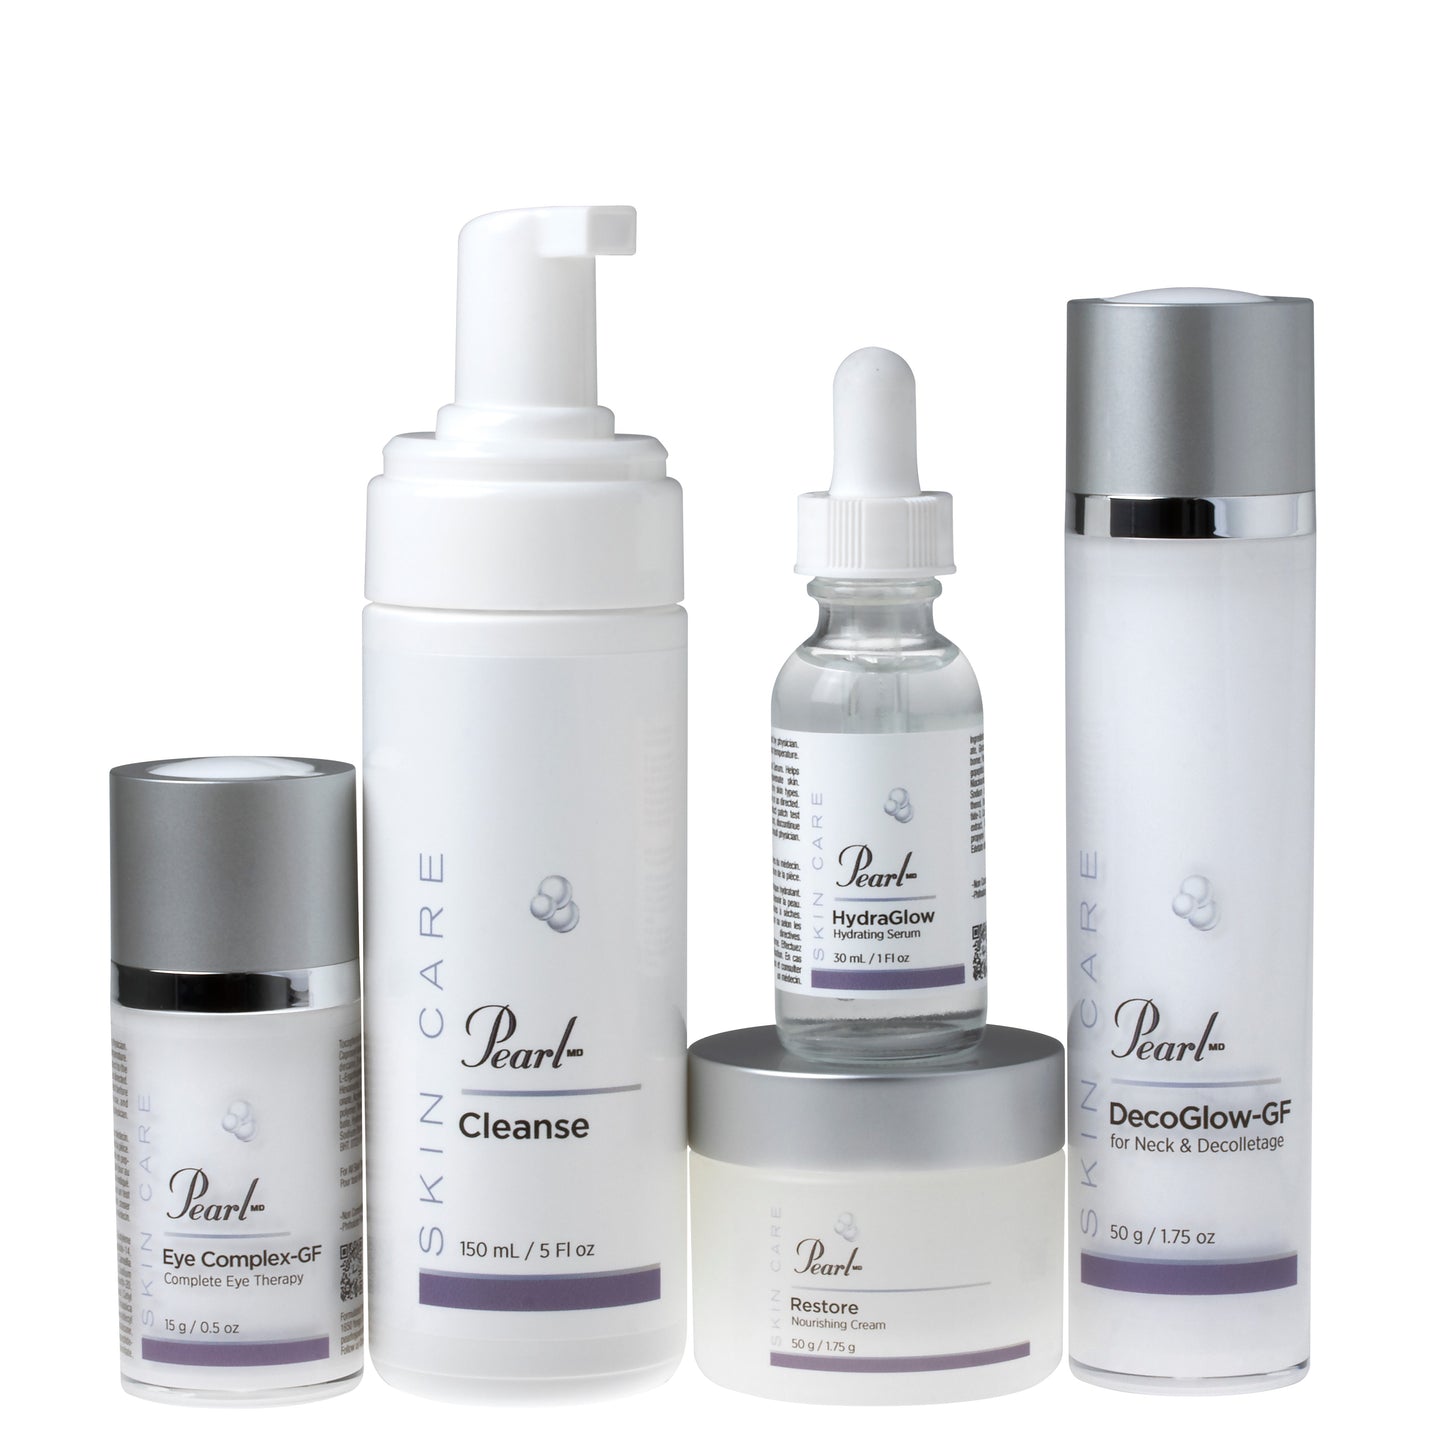 PearlMD Skincare Ageless Skin kit is designed to address signs of aging in the skin and restore moisture and hydration